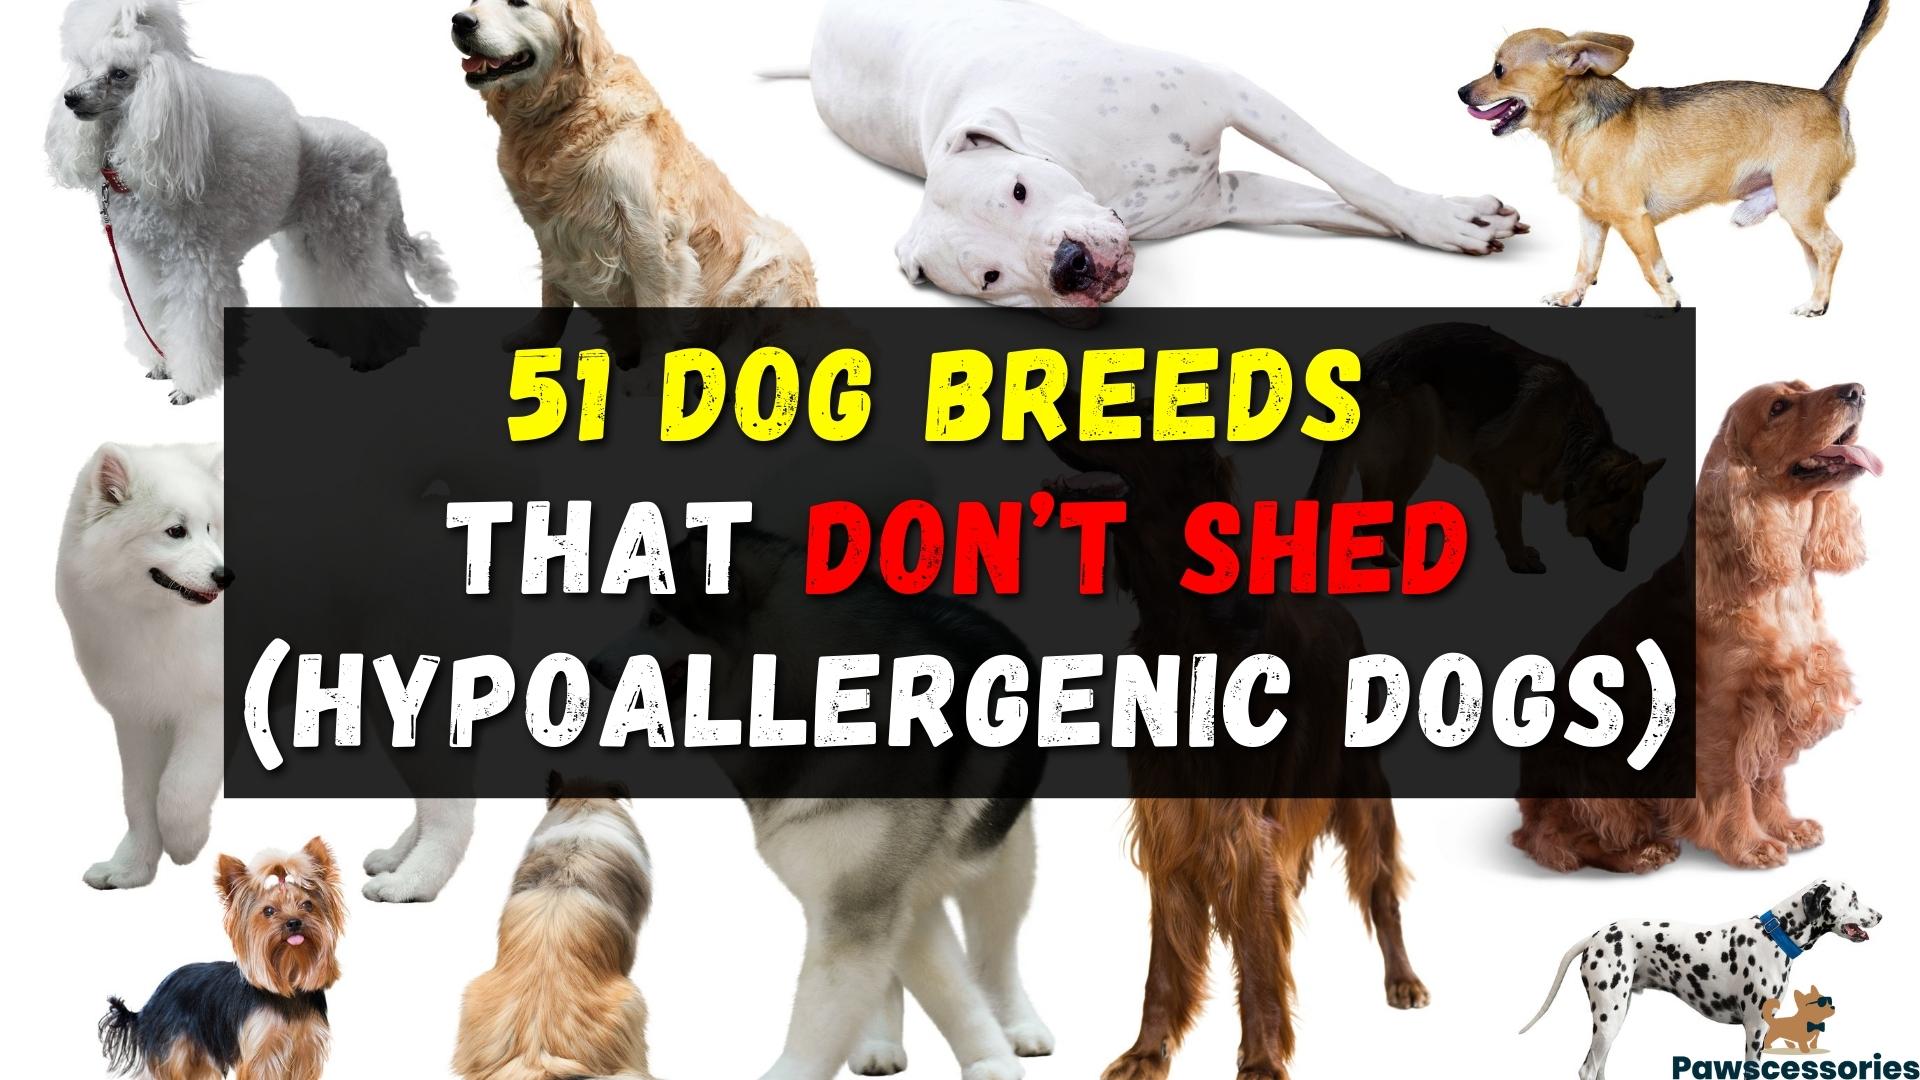 51 Dog Breeds That Don’t Shed (Hypoallergenic Dogs)